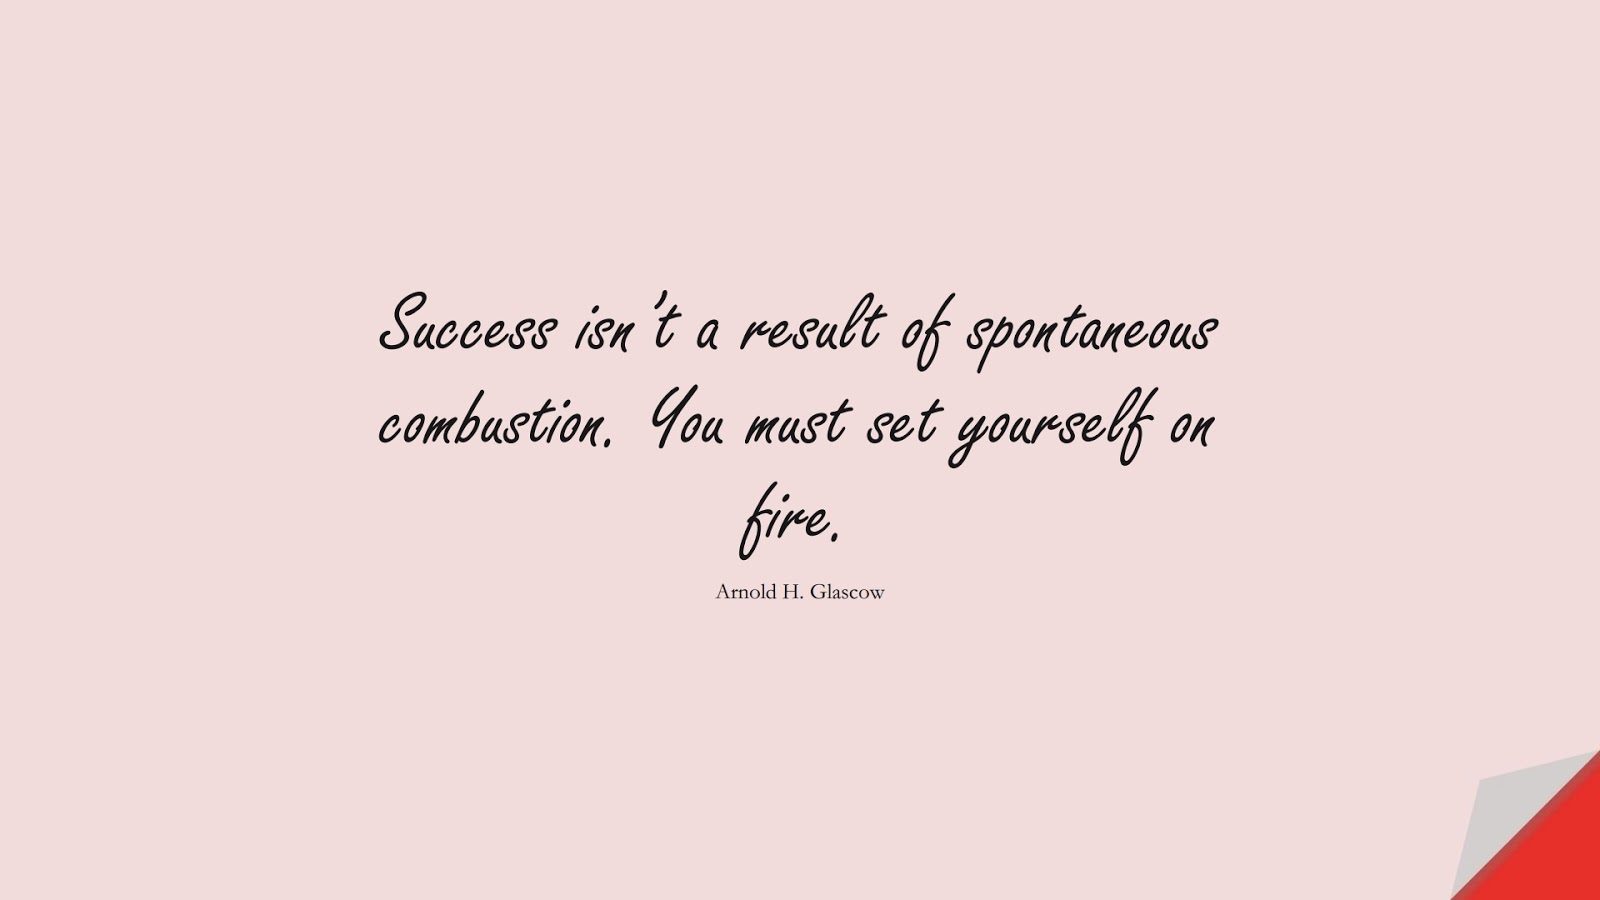 Success isn’t a result of spontaneous combustion. You must set yourself on fire. (Arnold H. Glascow);  #SuccessQuotes